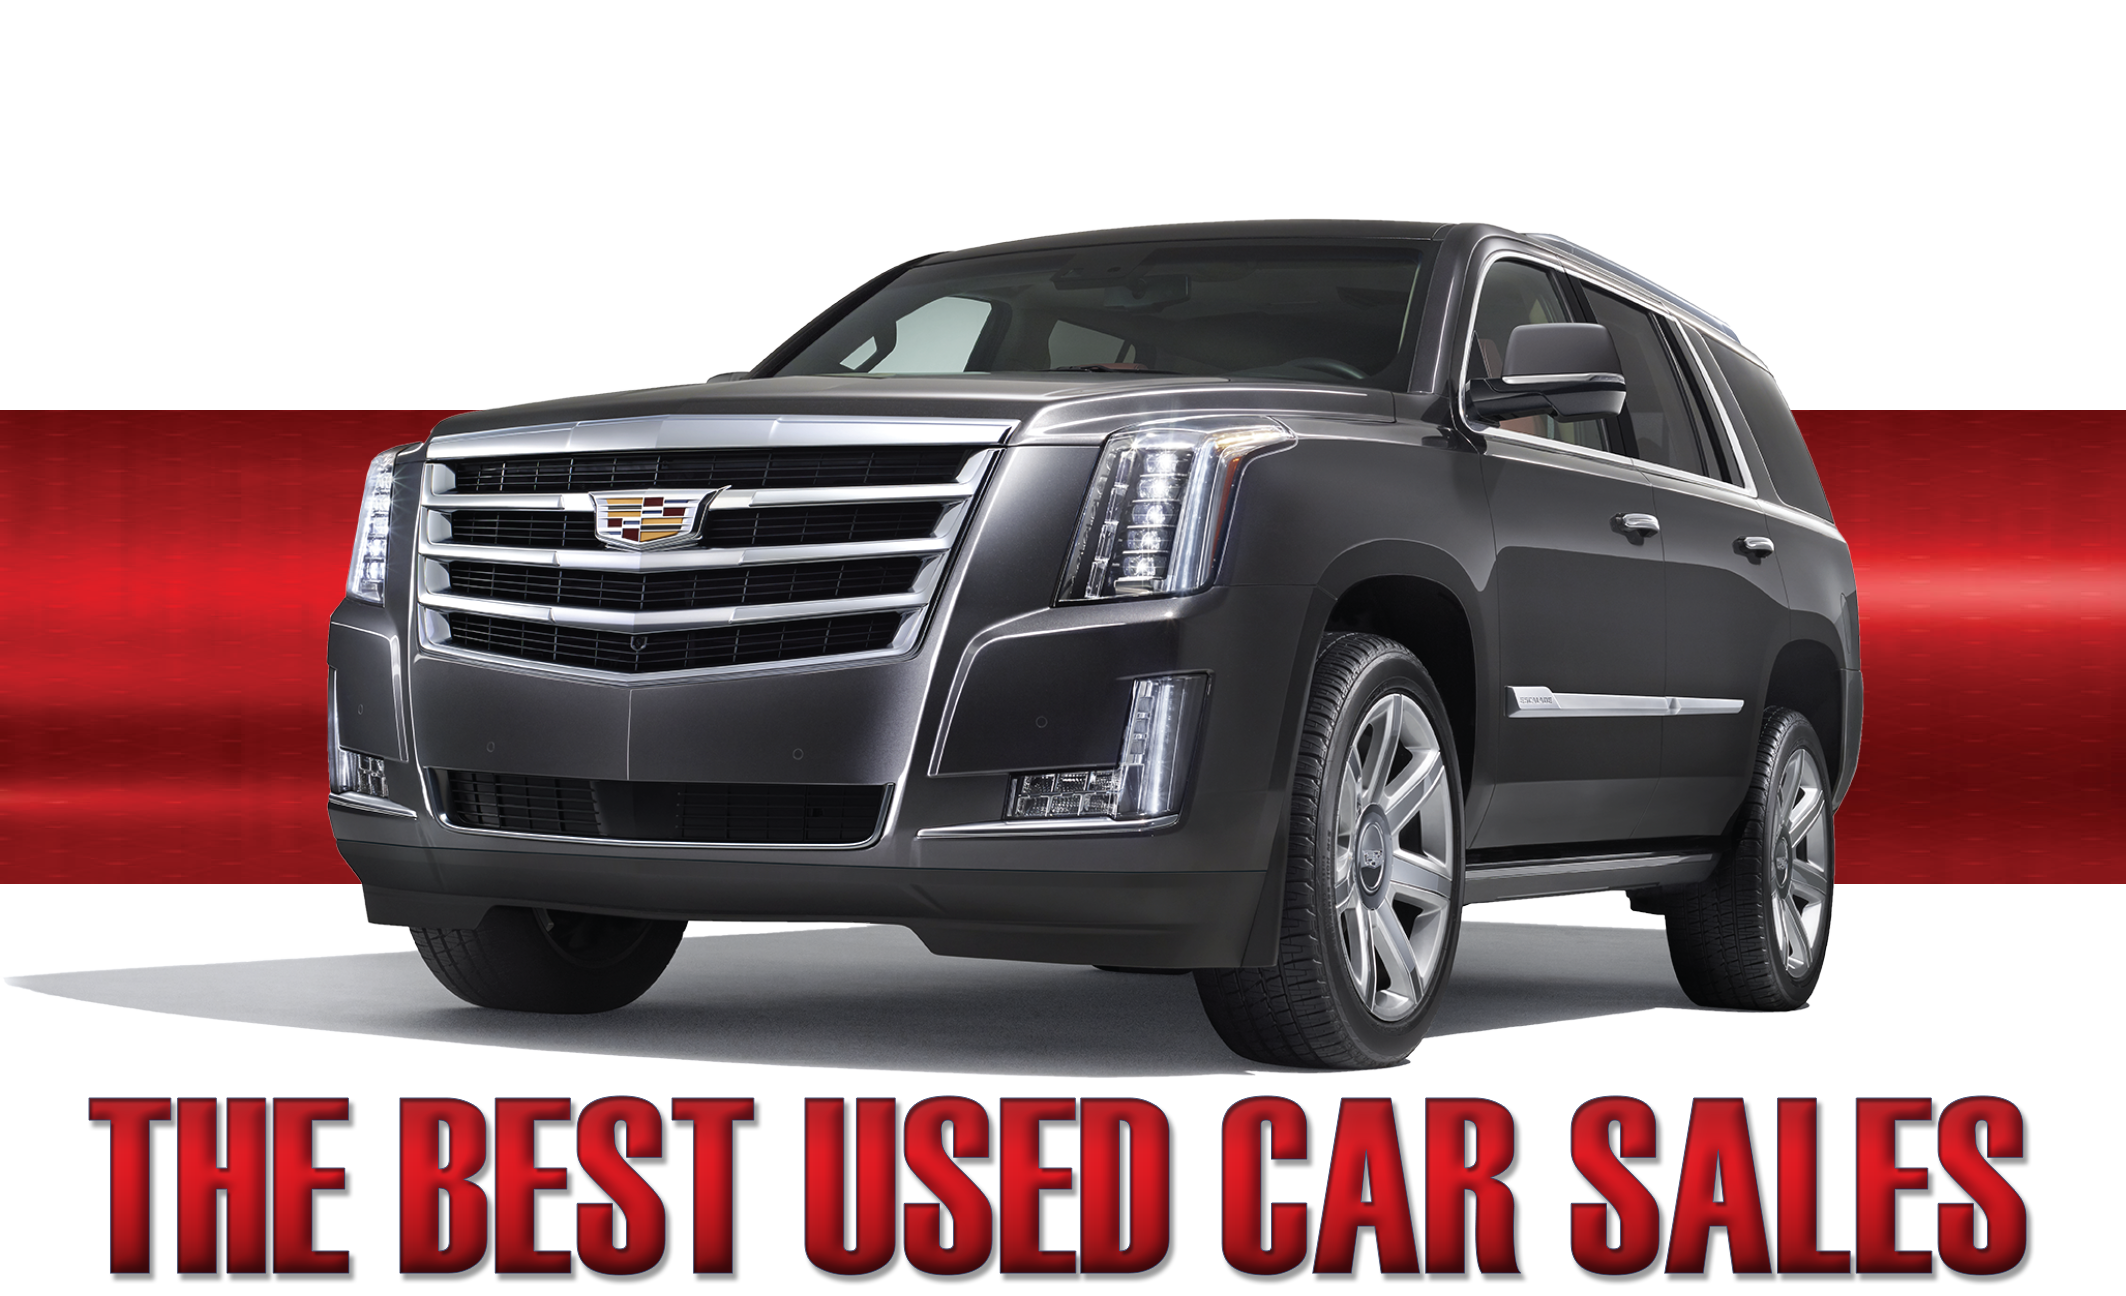 THE BEST USED CAR SALES